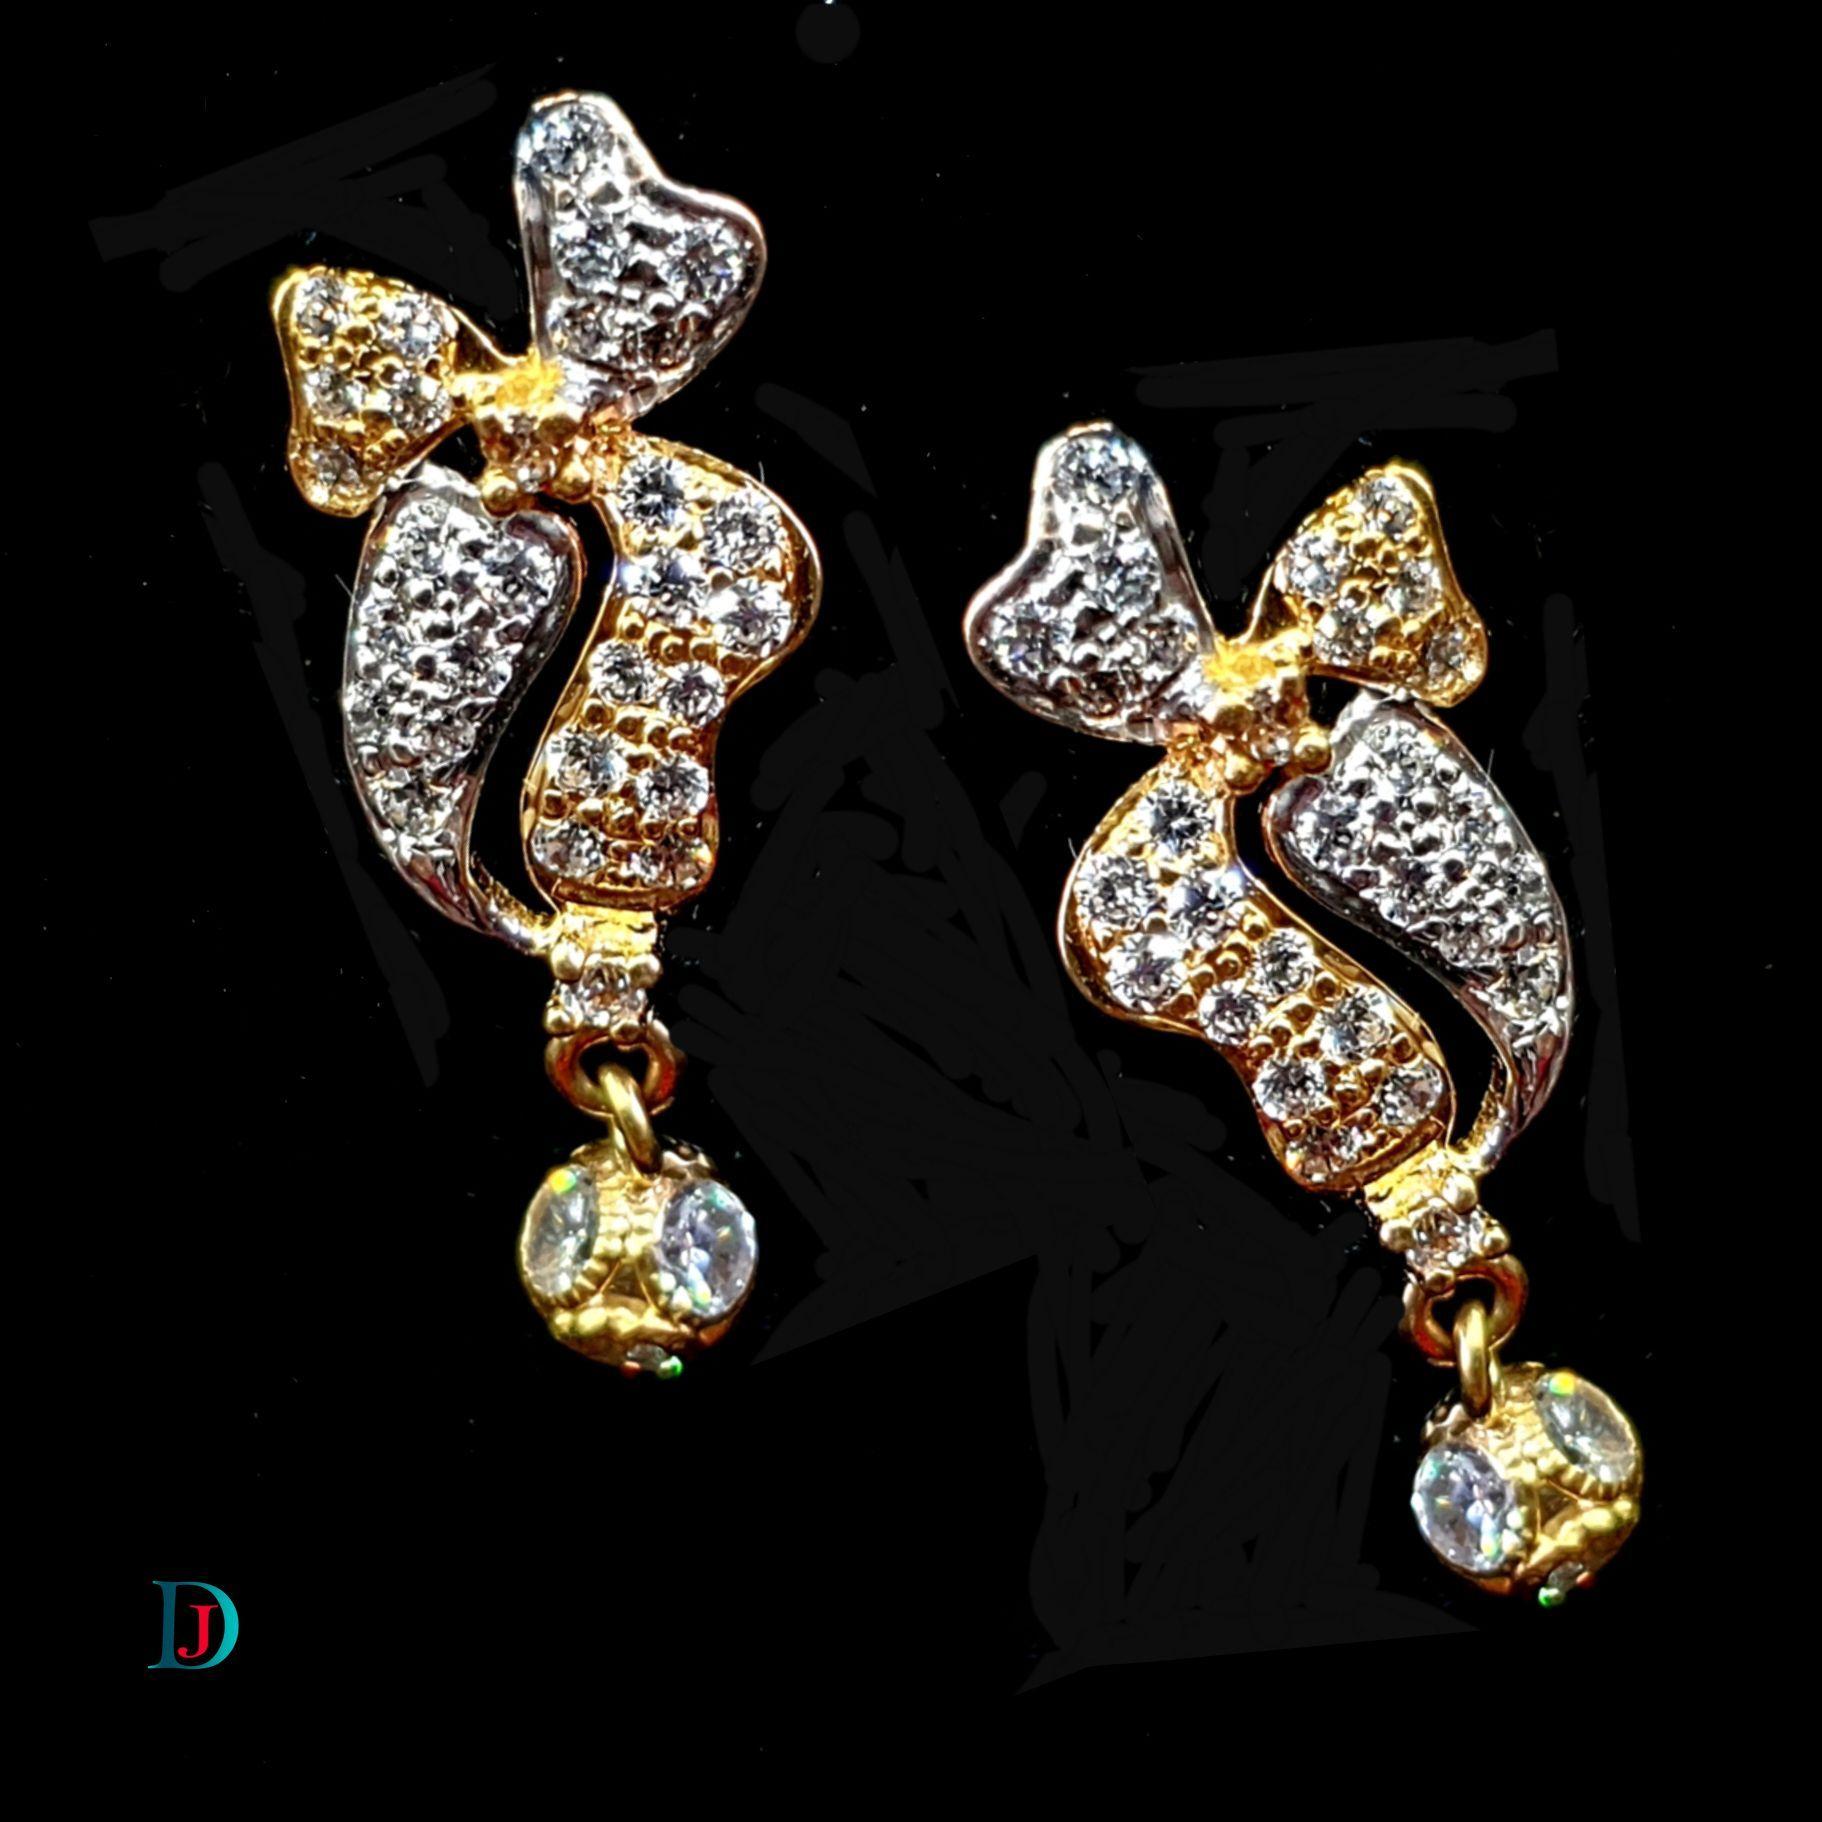 New and Latest Design of Desi Indian Rajasthani Gold Earring 